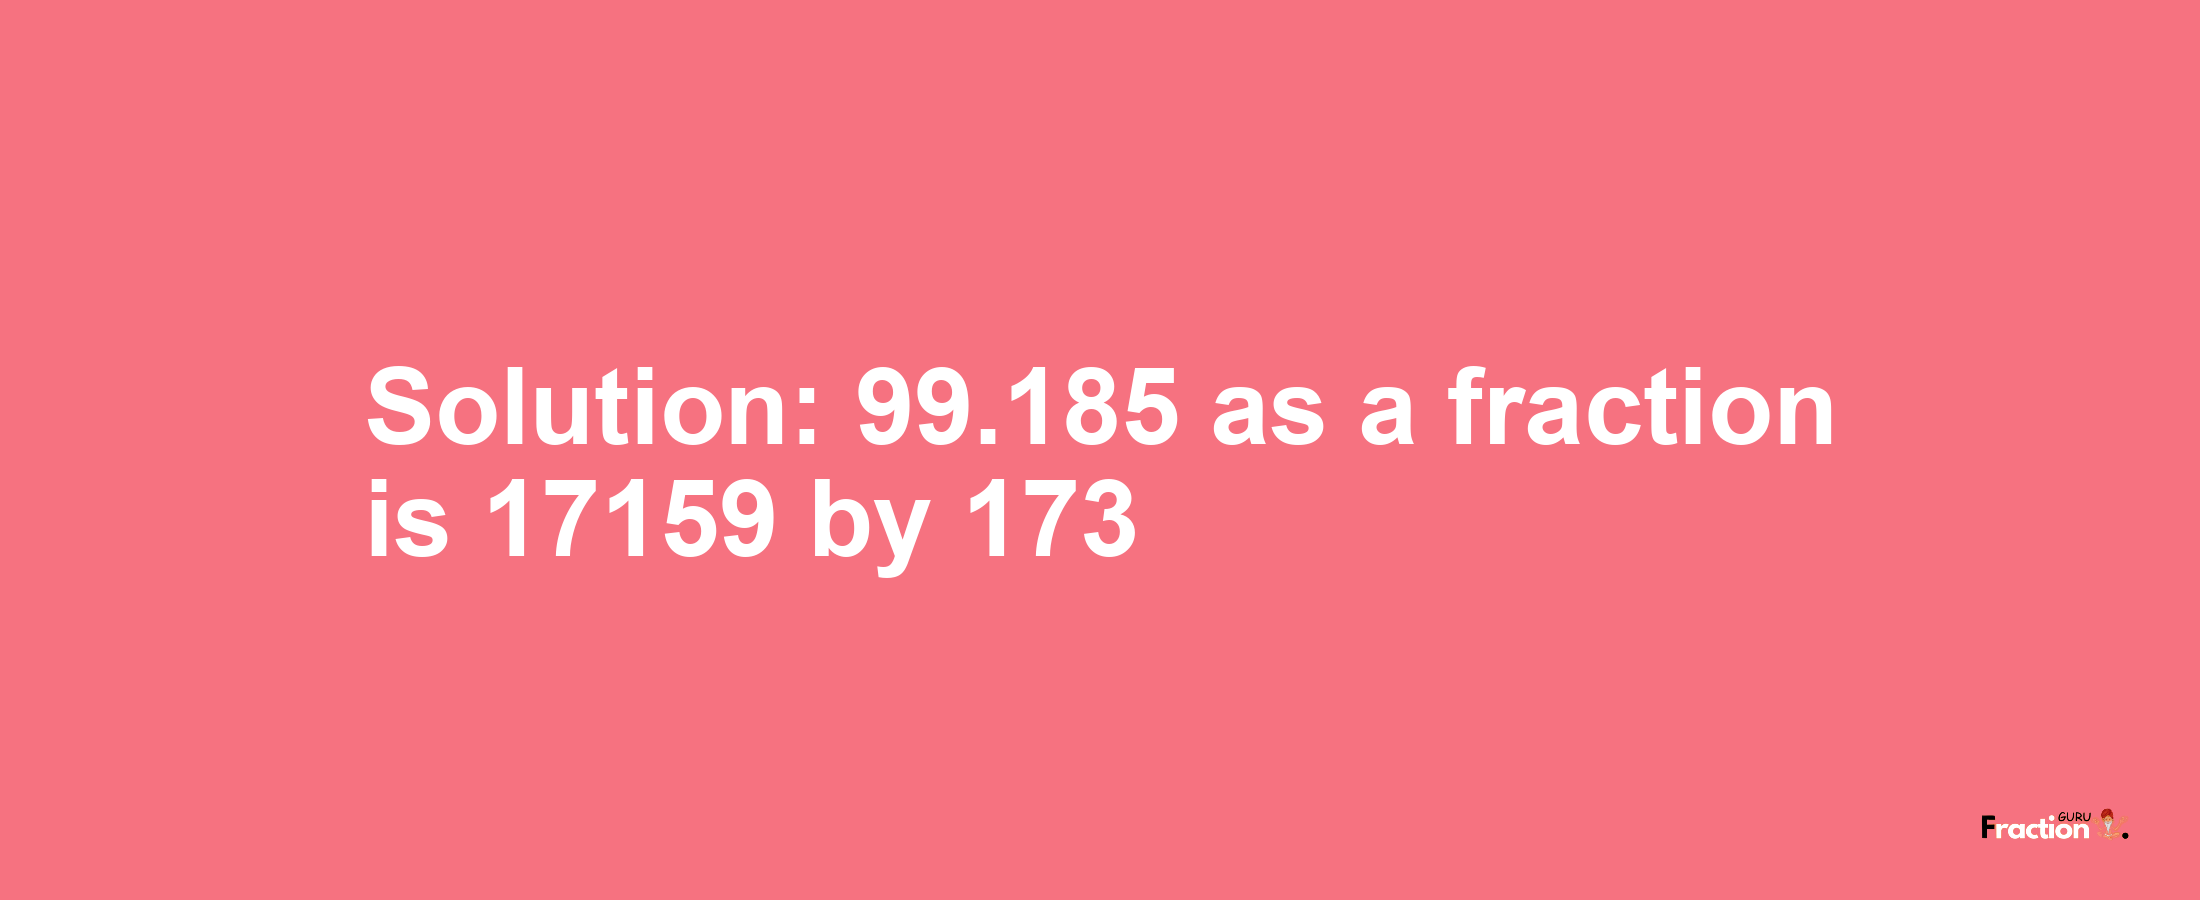 Solution:99.185 as a fraction is 17159/173